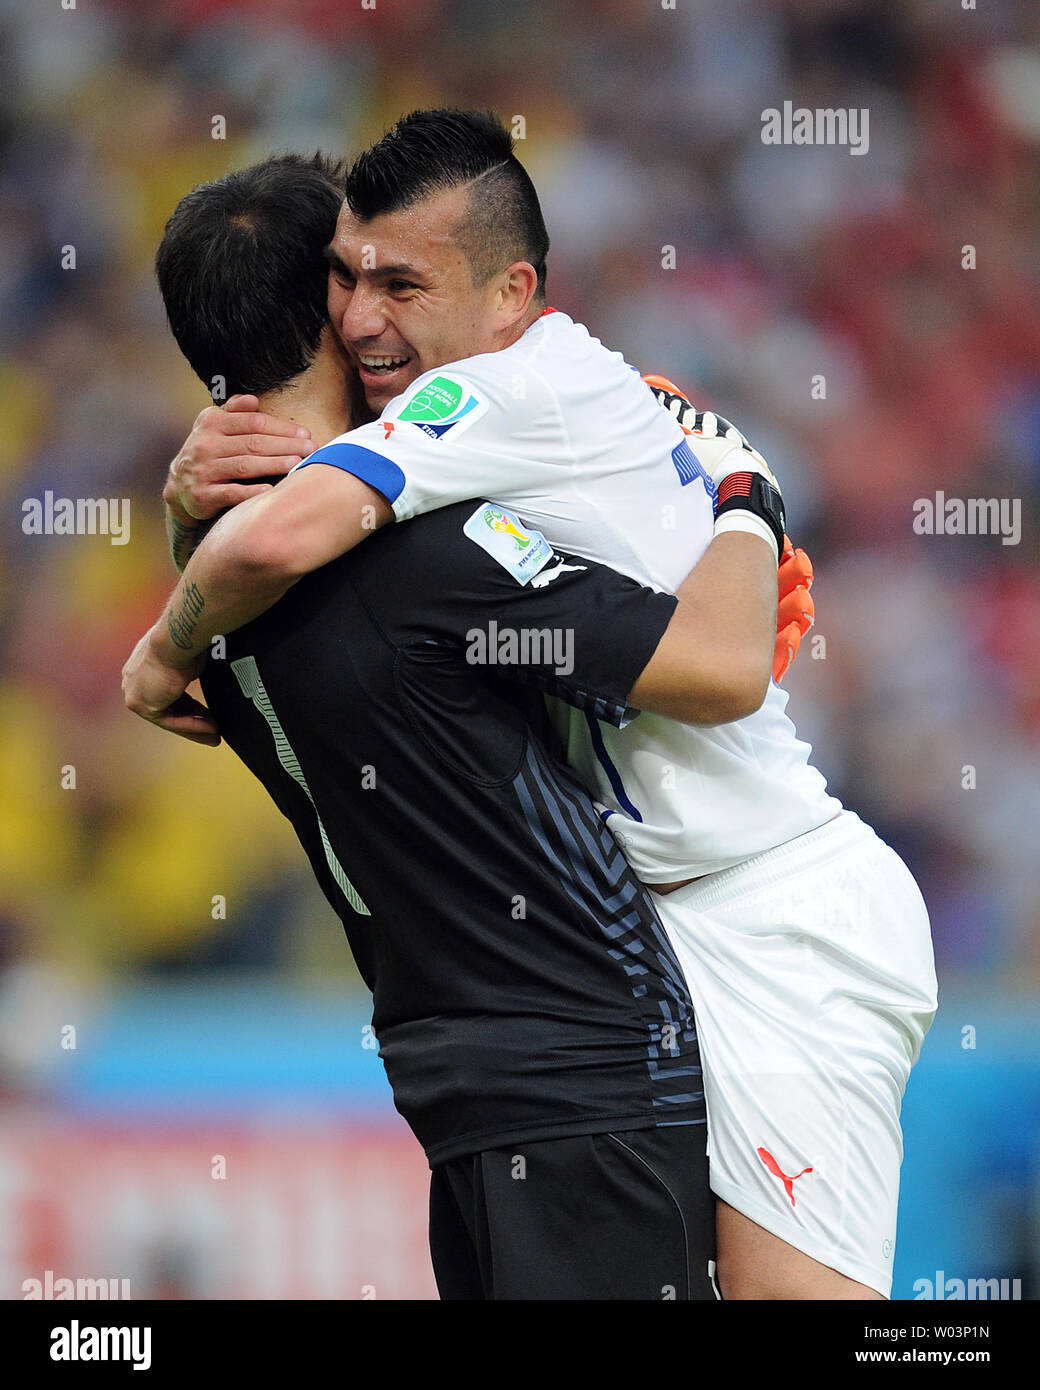 Claudio Bravo (L) of Chile embraces team-mate Gary Medel following the opening goal during the 2014 FIFA World Cup Group B match at the Estadio do Maracana in Rio de Janeiro, Brazil on June 18, 2014. UPI/Chris Brunskill Stock Photo